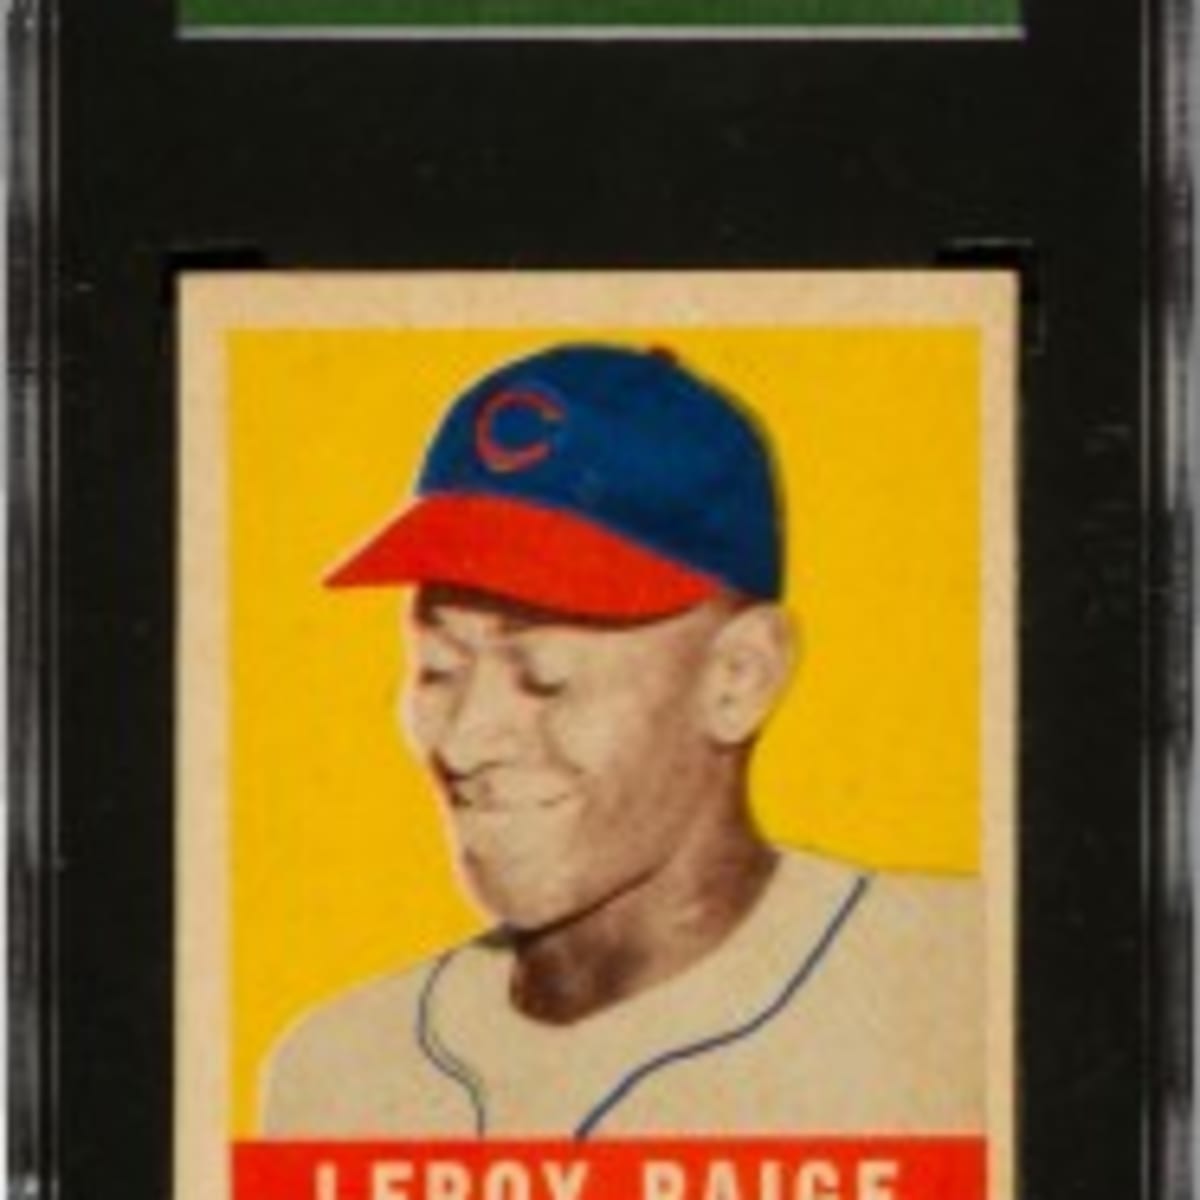 After pitching for Bill Veeck in Cleveland in 1948, Satchel Paige